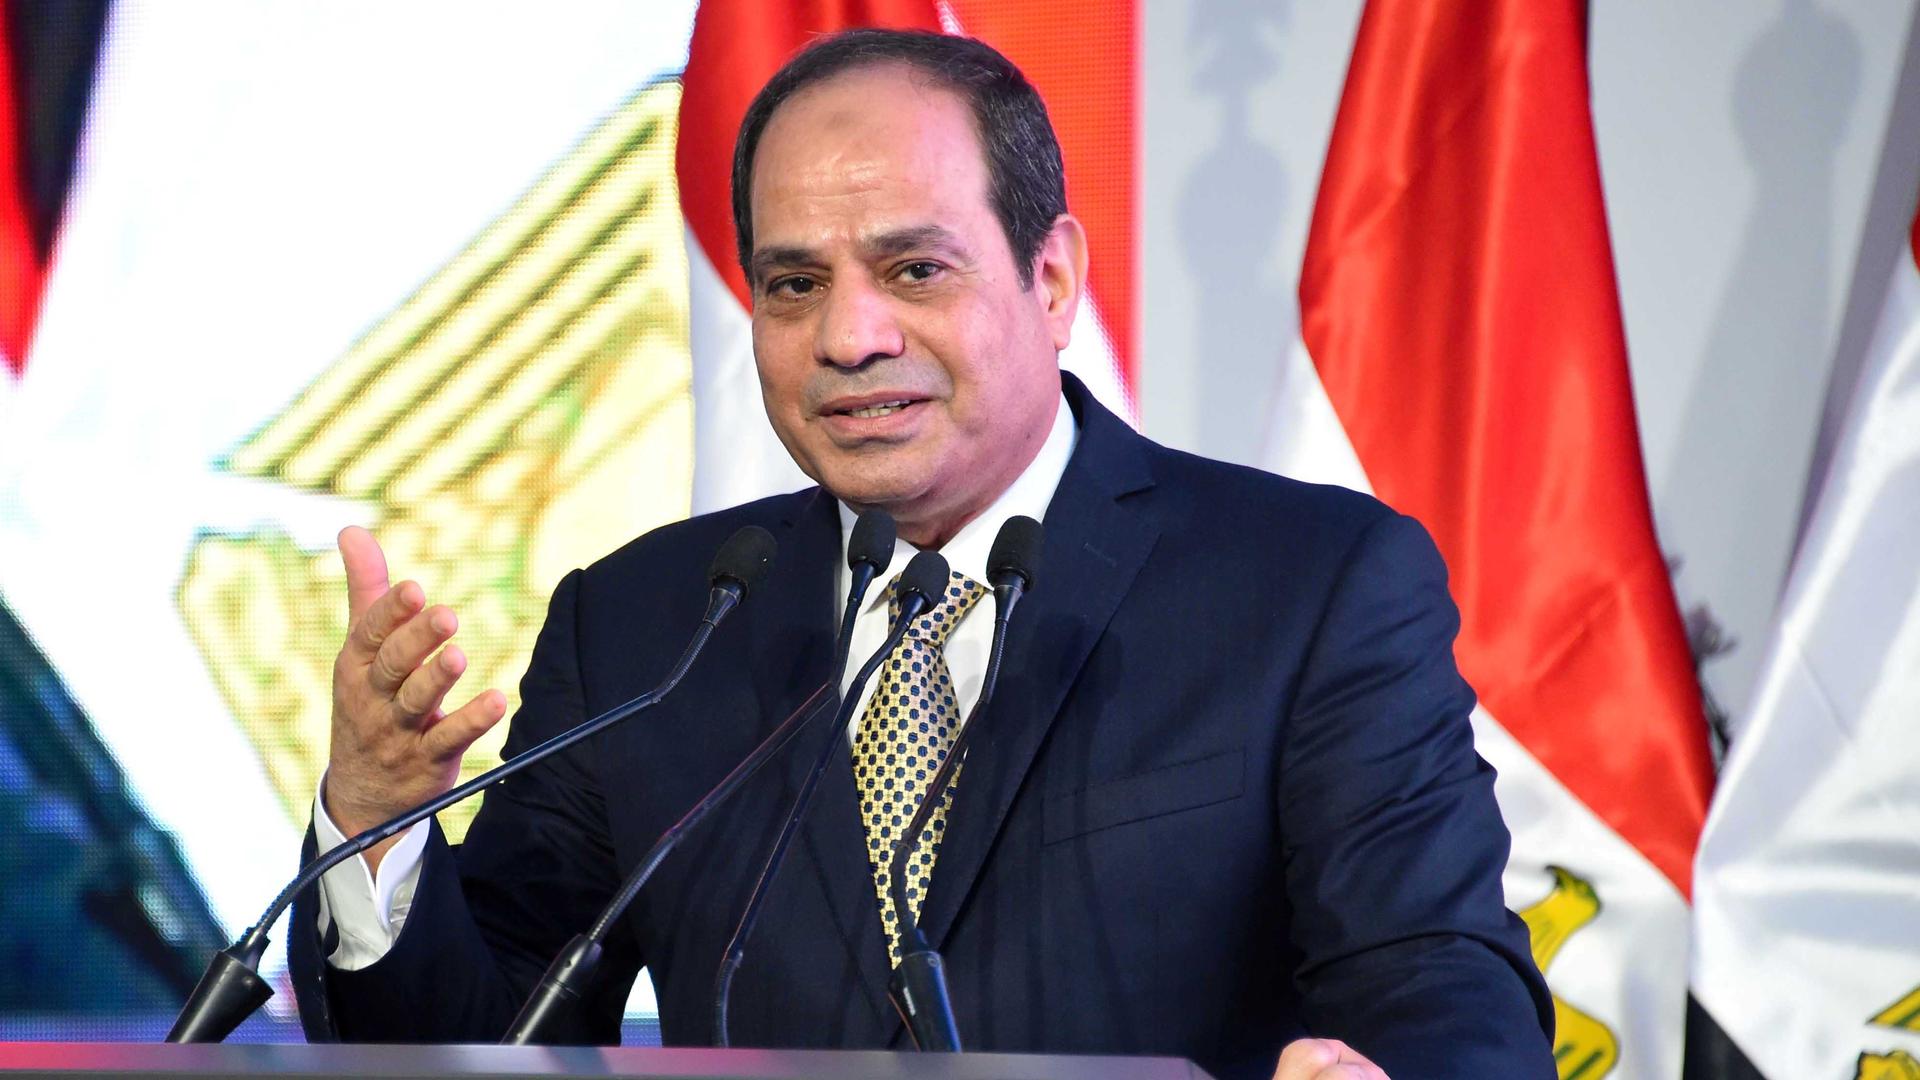 Egyptian President Abdul Fattah al-Sisi speaks during the opening of the first and second phases of the housing project "Long Live Egypt", Egypt May 30, 2016.